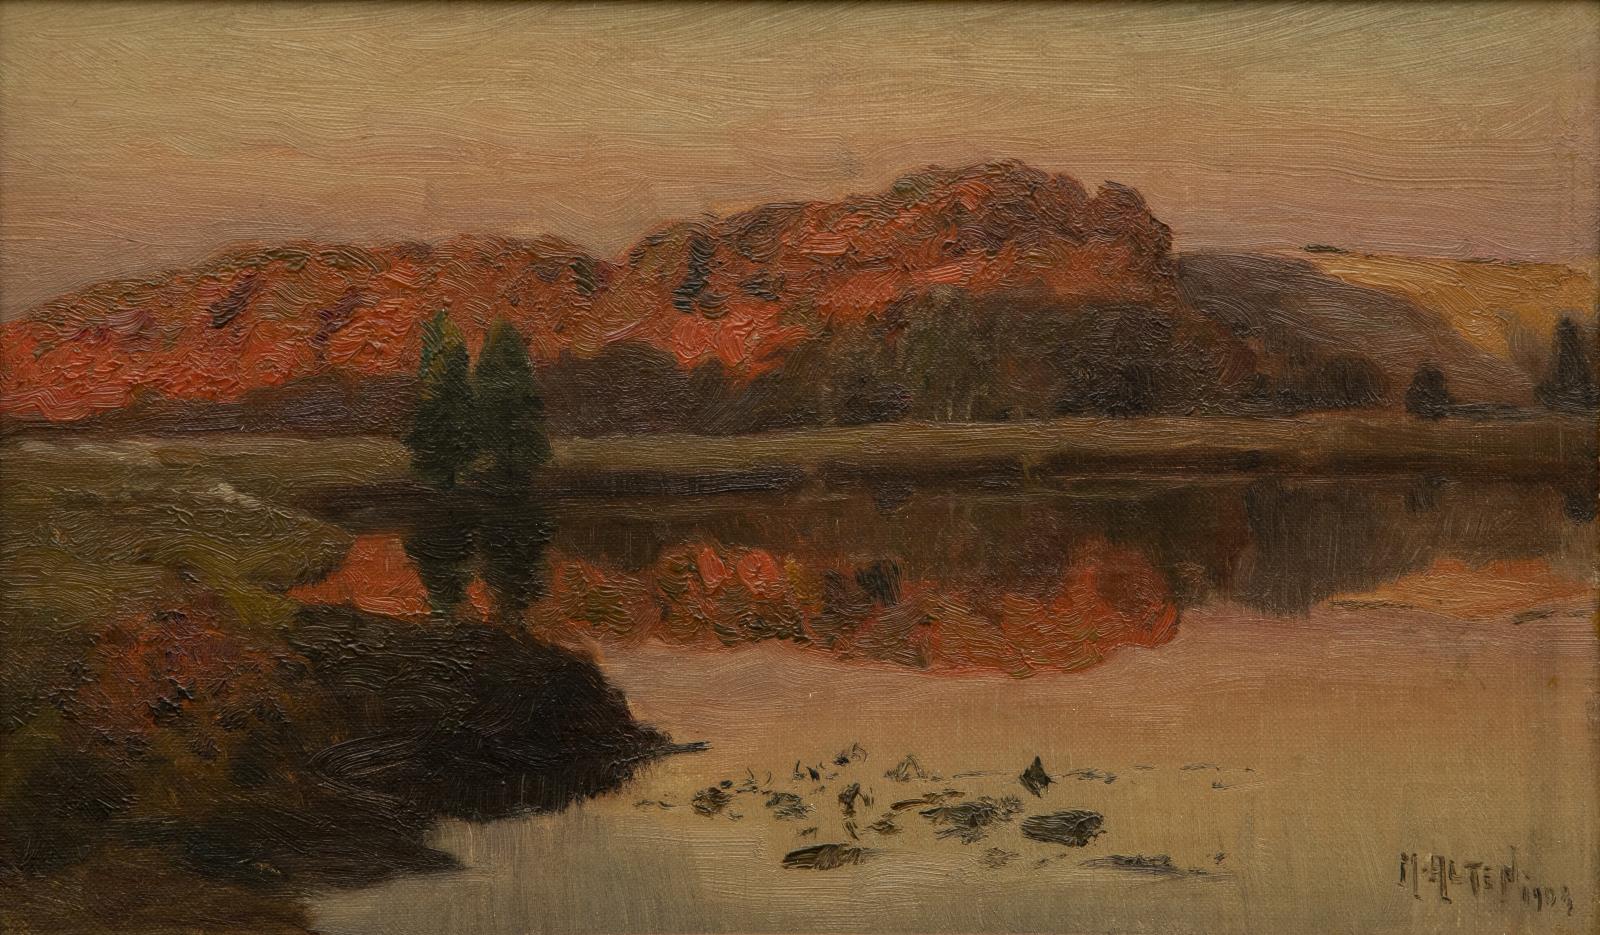 Side of a mountains brushed red with the setting sun, reflecting in water below.